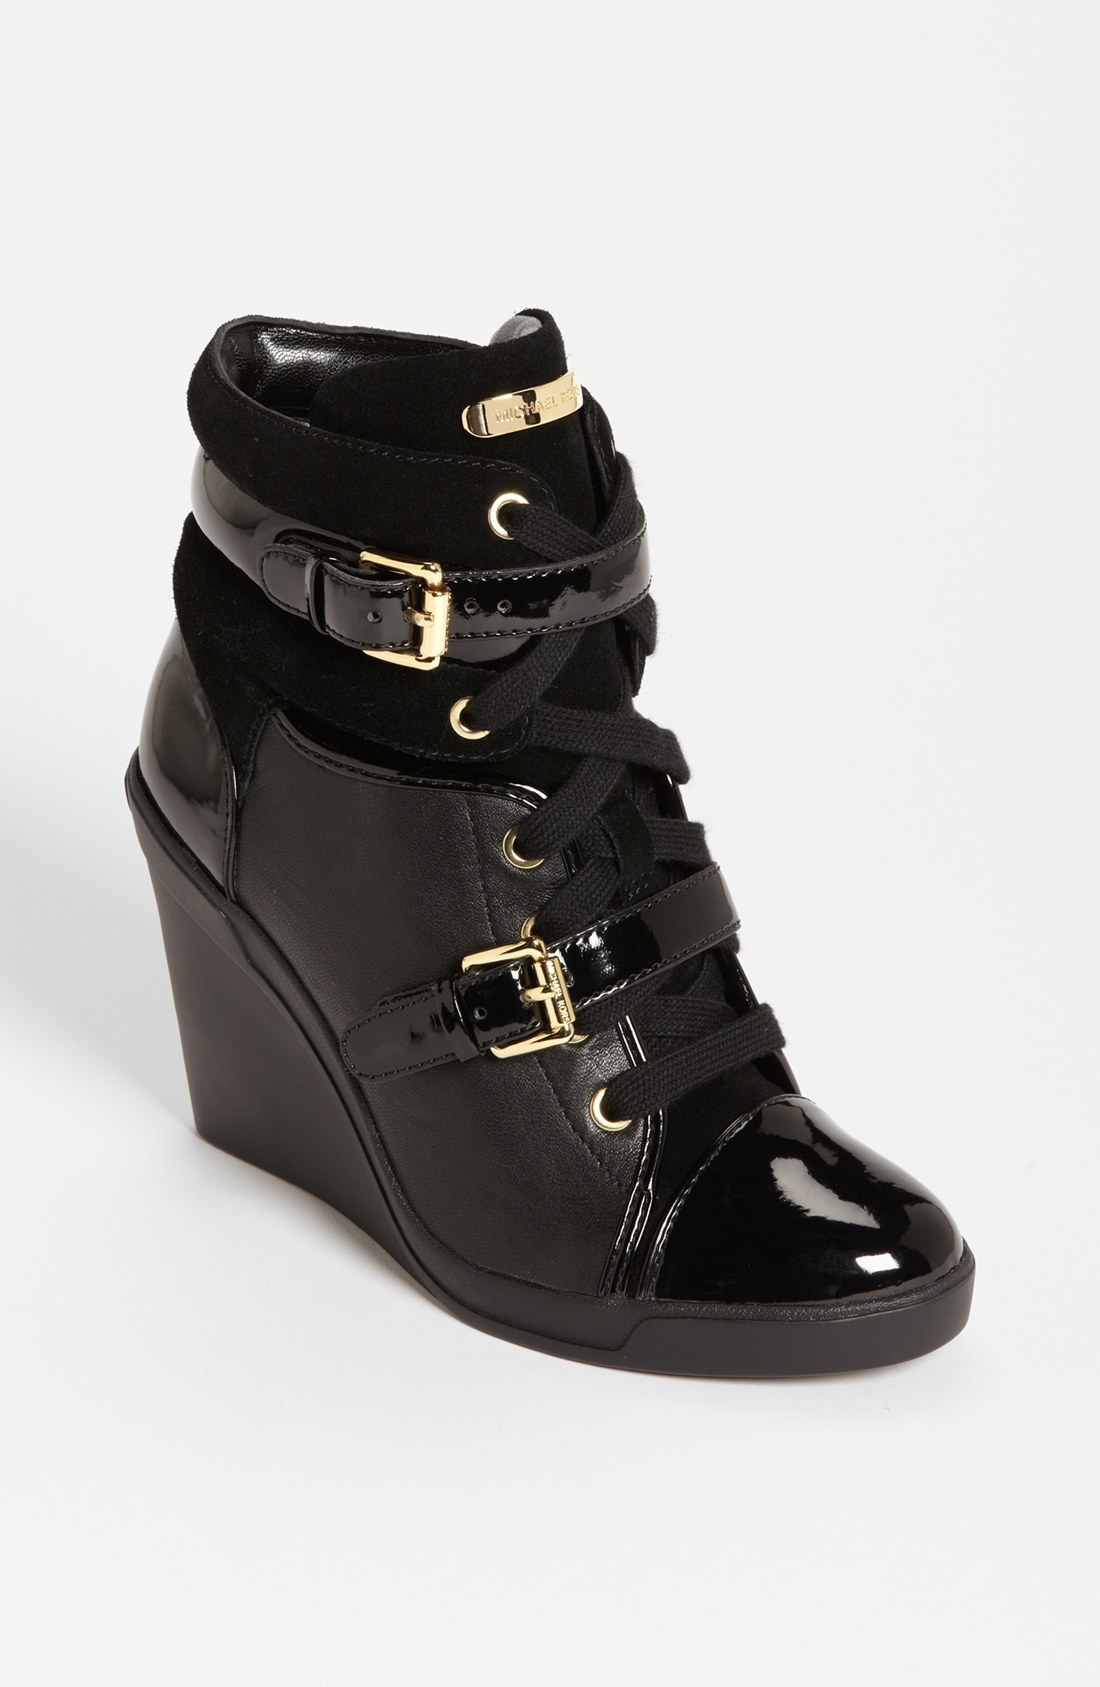 Michael KORS SKID ICONIC SEXY GOLD LOGO BUCKLE LACE UP WEDGE SNEAKERS ...